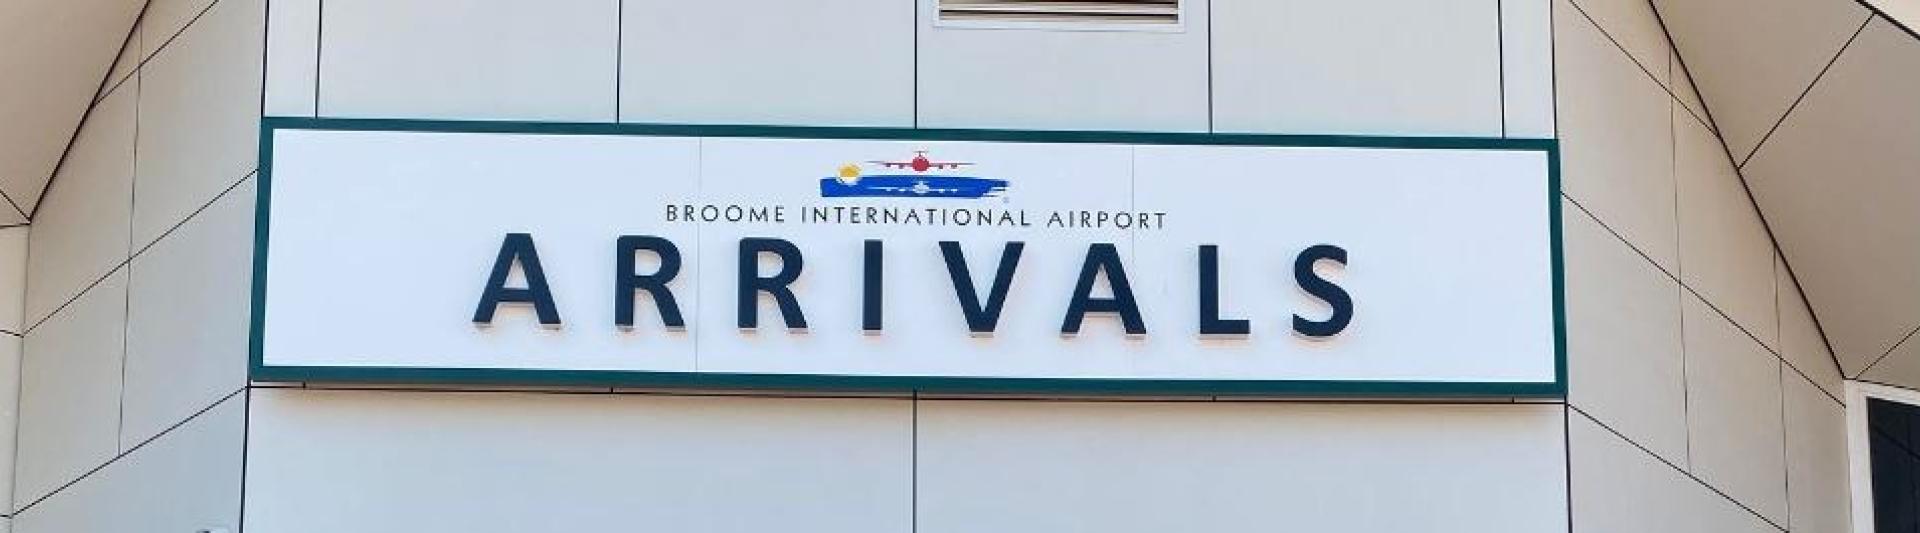 Broome international airport copyright broome visitor centre